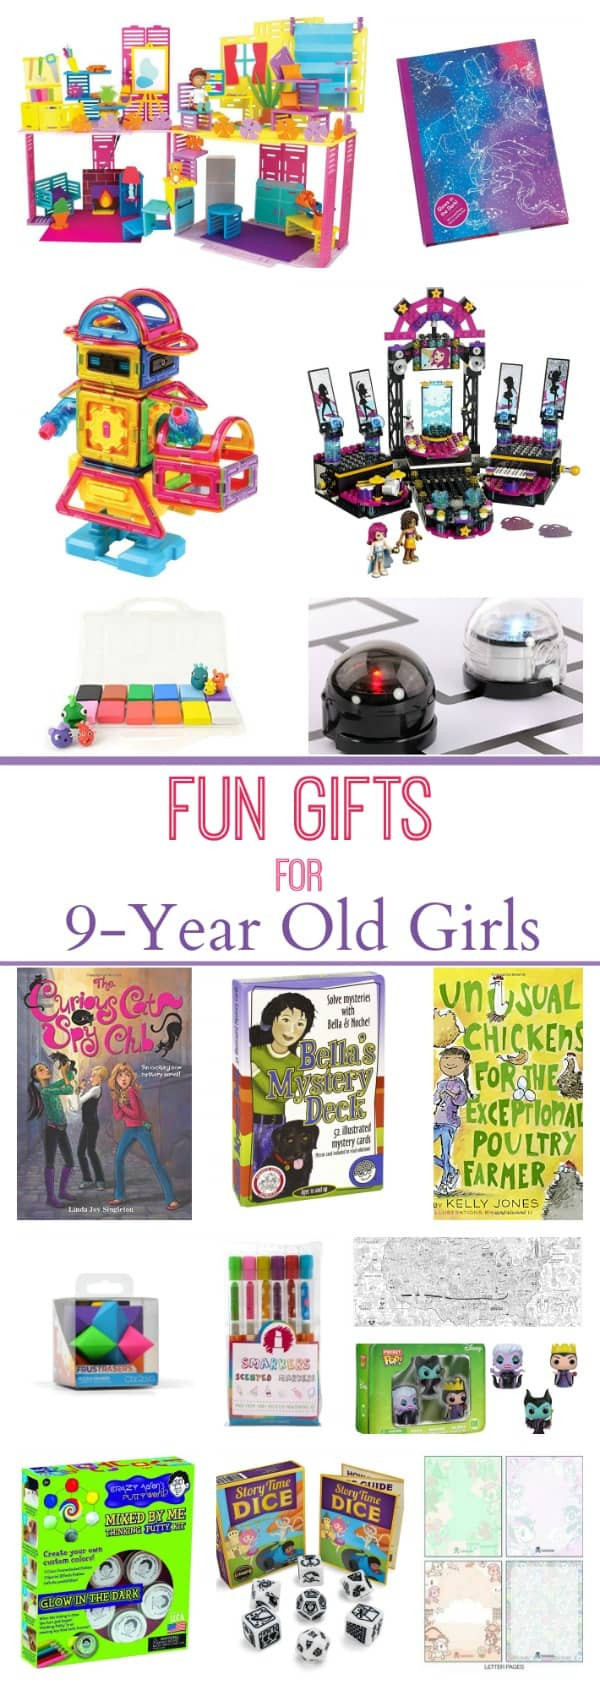 Christmas Gift Ideas For 9 Year Old Girl
 Gifts for 9 Year Old Girls